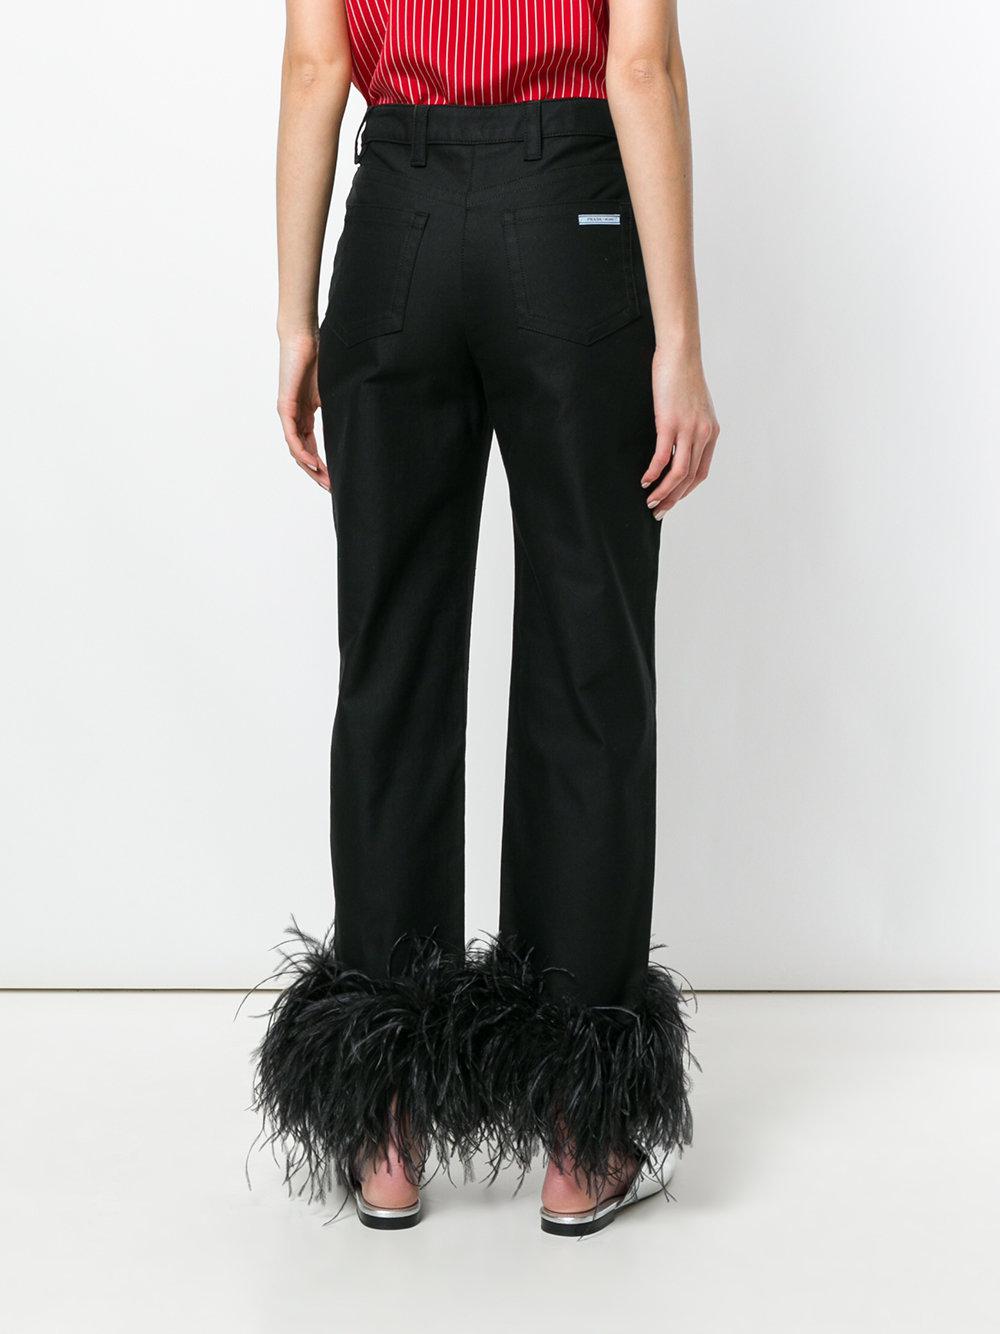 Prada Cotton High Waisted Feather Trim Trousers in Black - Lyst